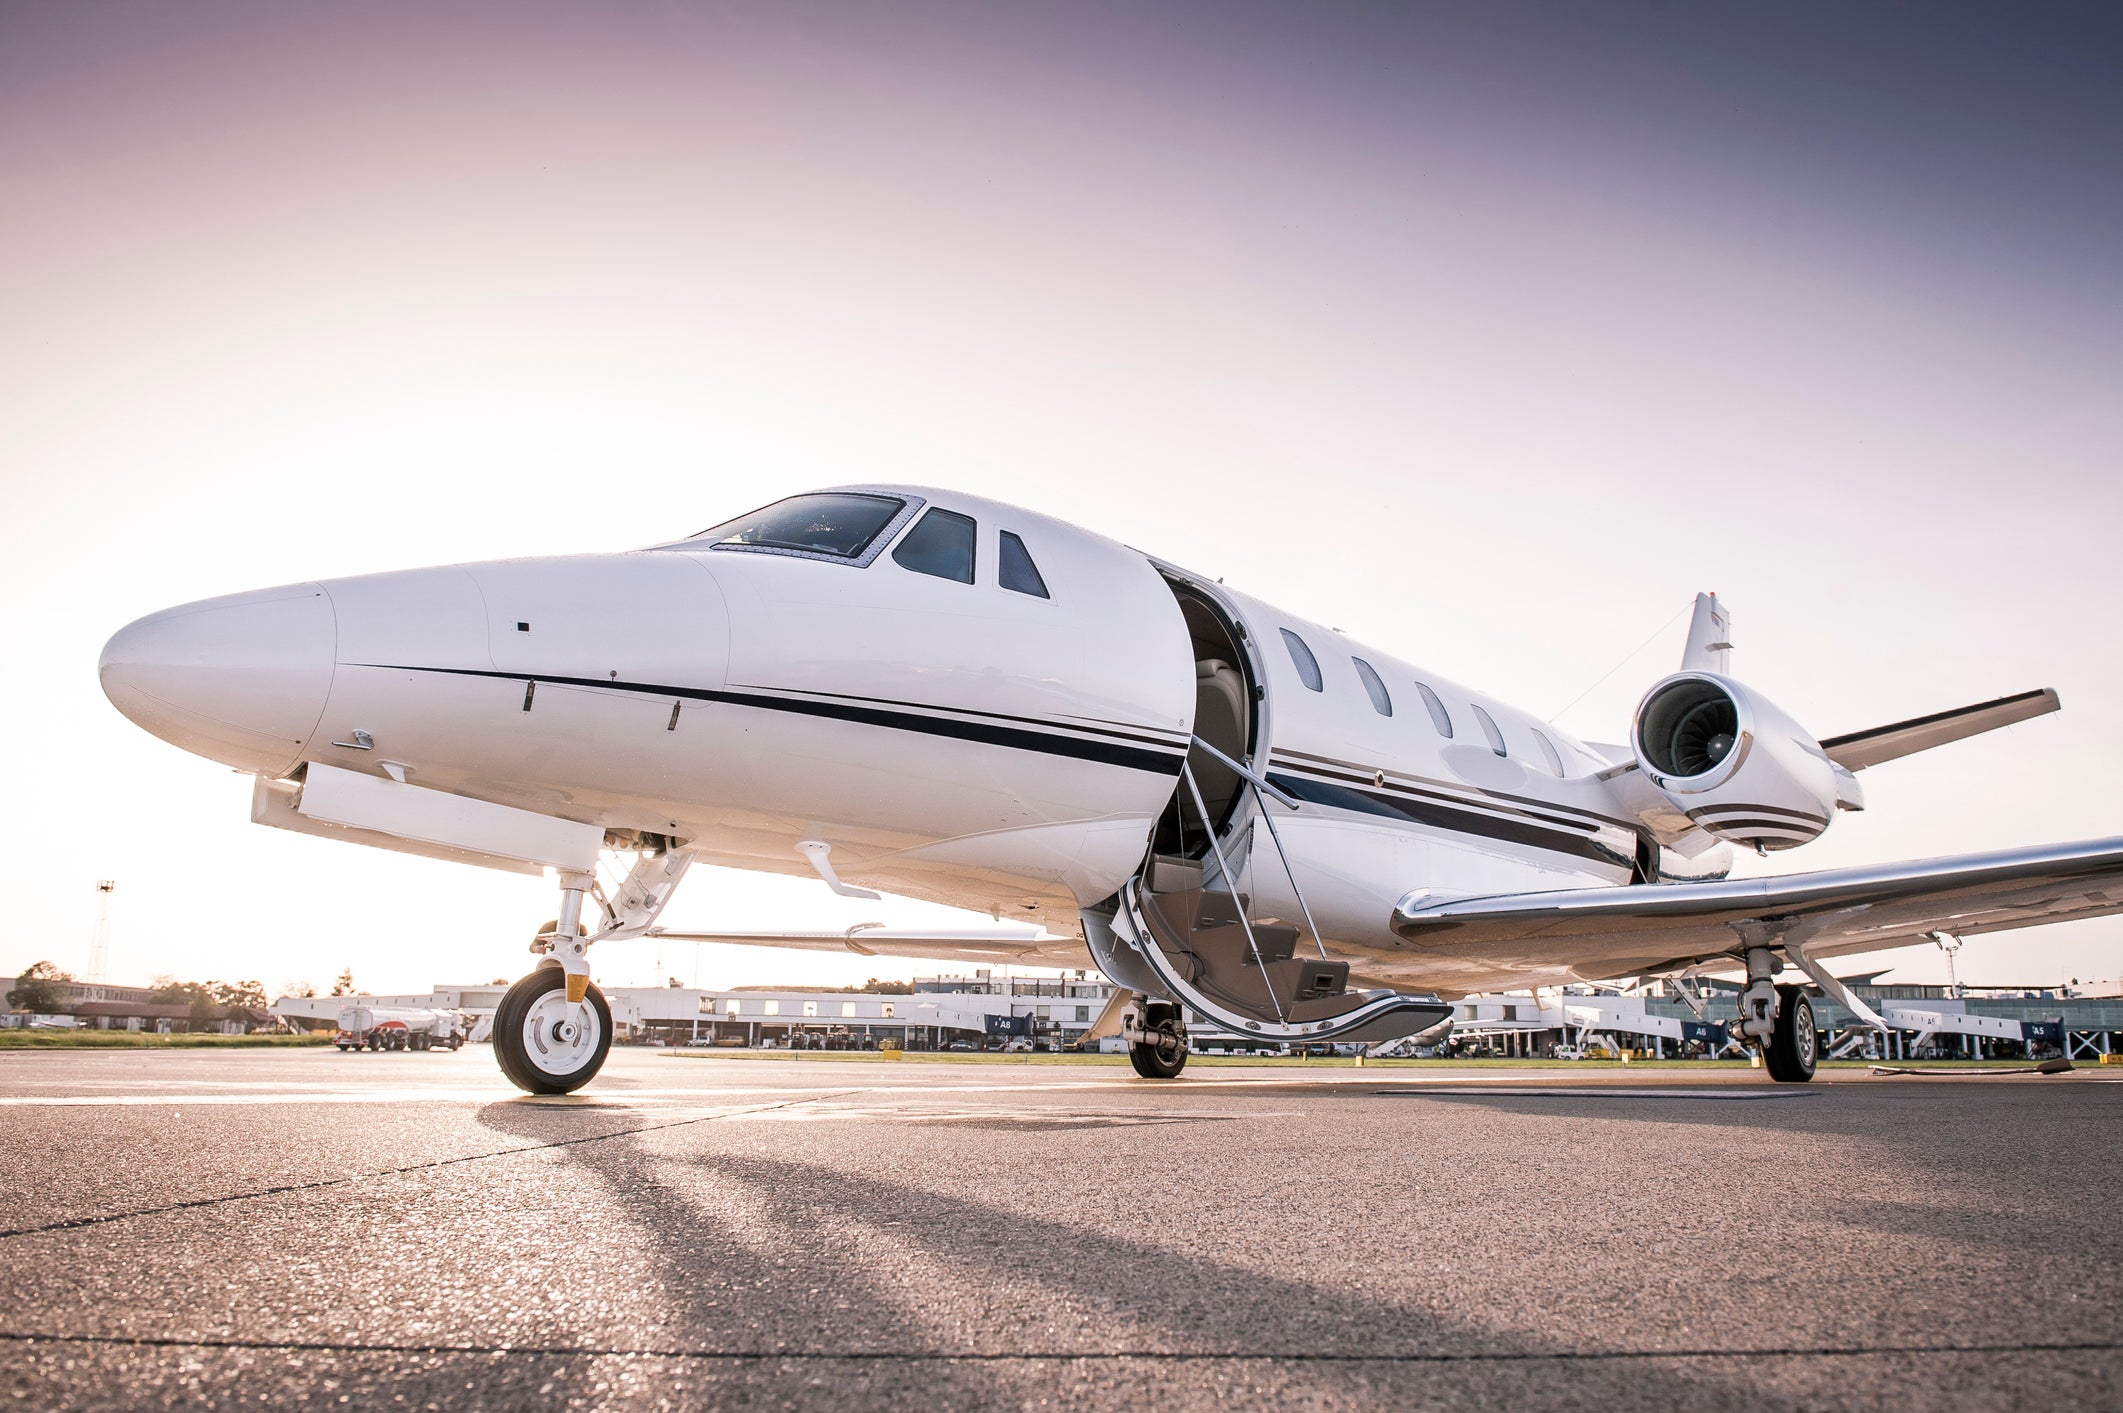 High life: a private jet of the kind that could face higher tax